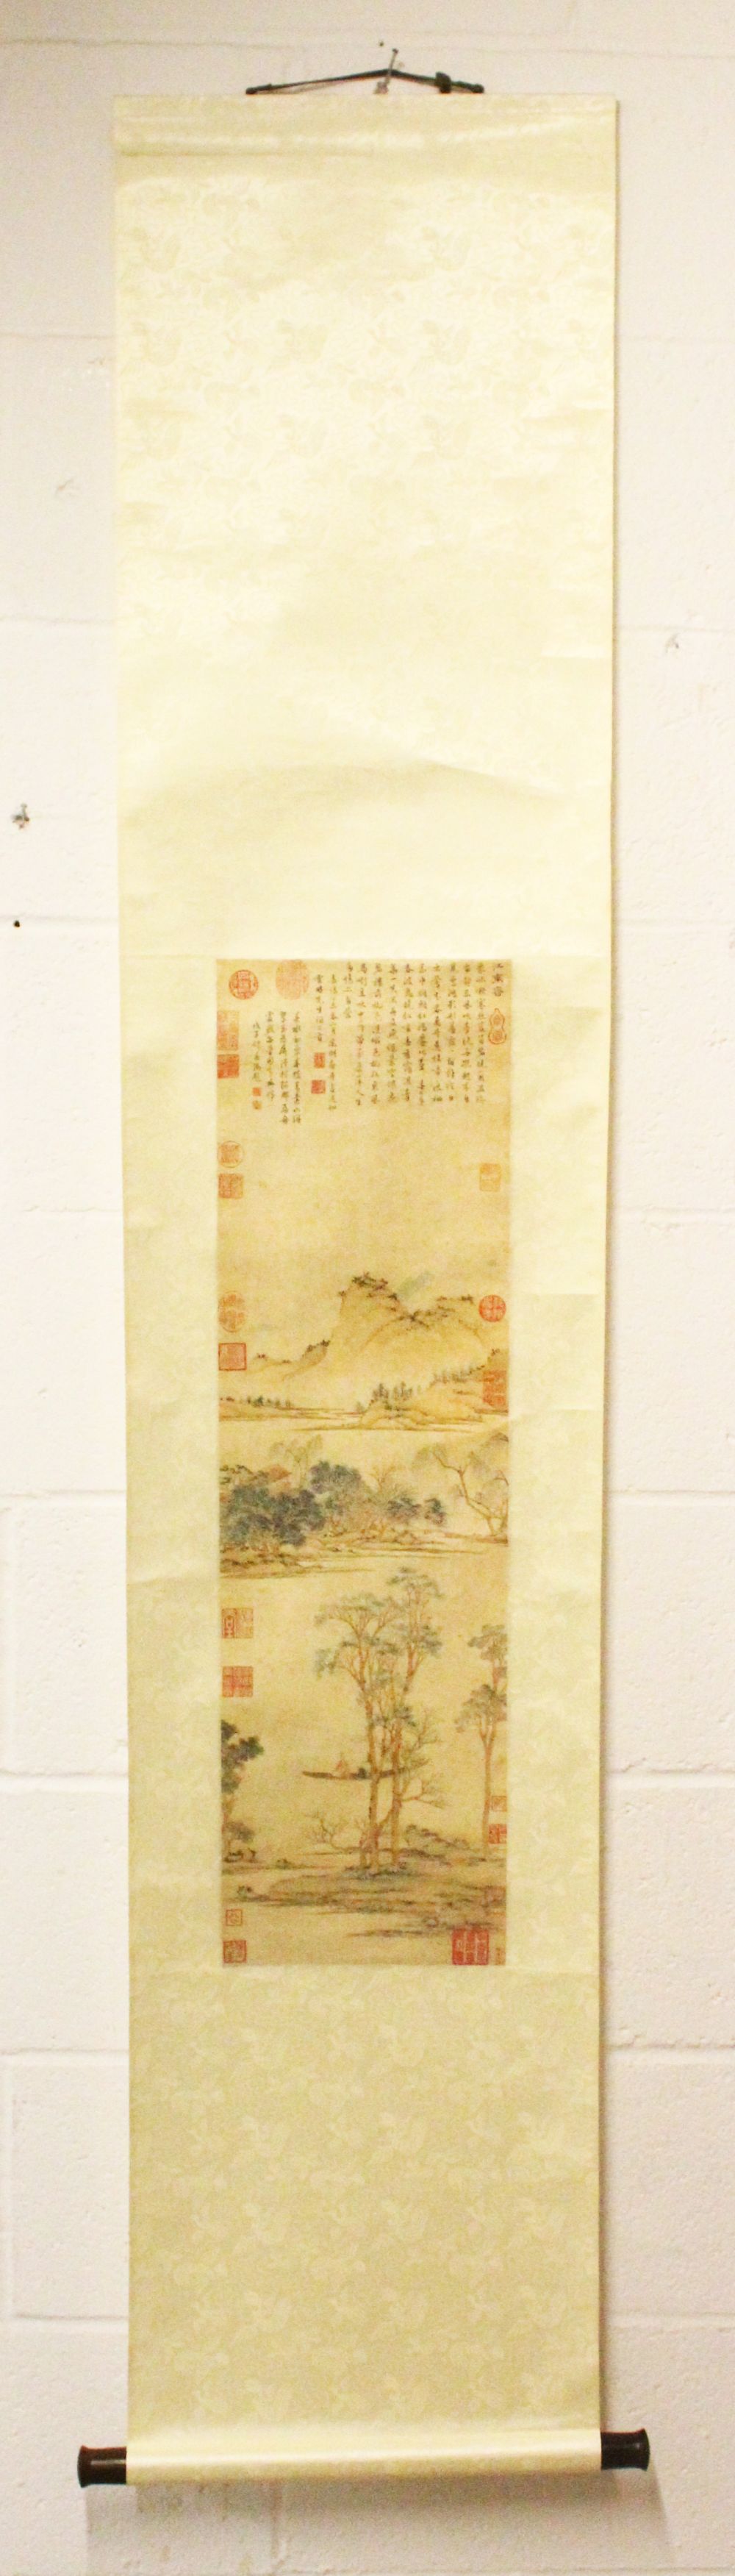 A GOOD CHINESE HANGING SCROLL PRINT OF A LANDSCAPE, the scroll with a detailed view of a - Image 4 of 6